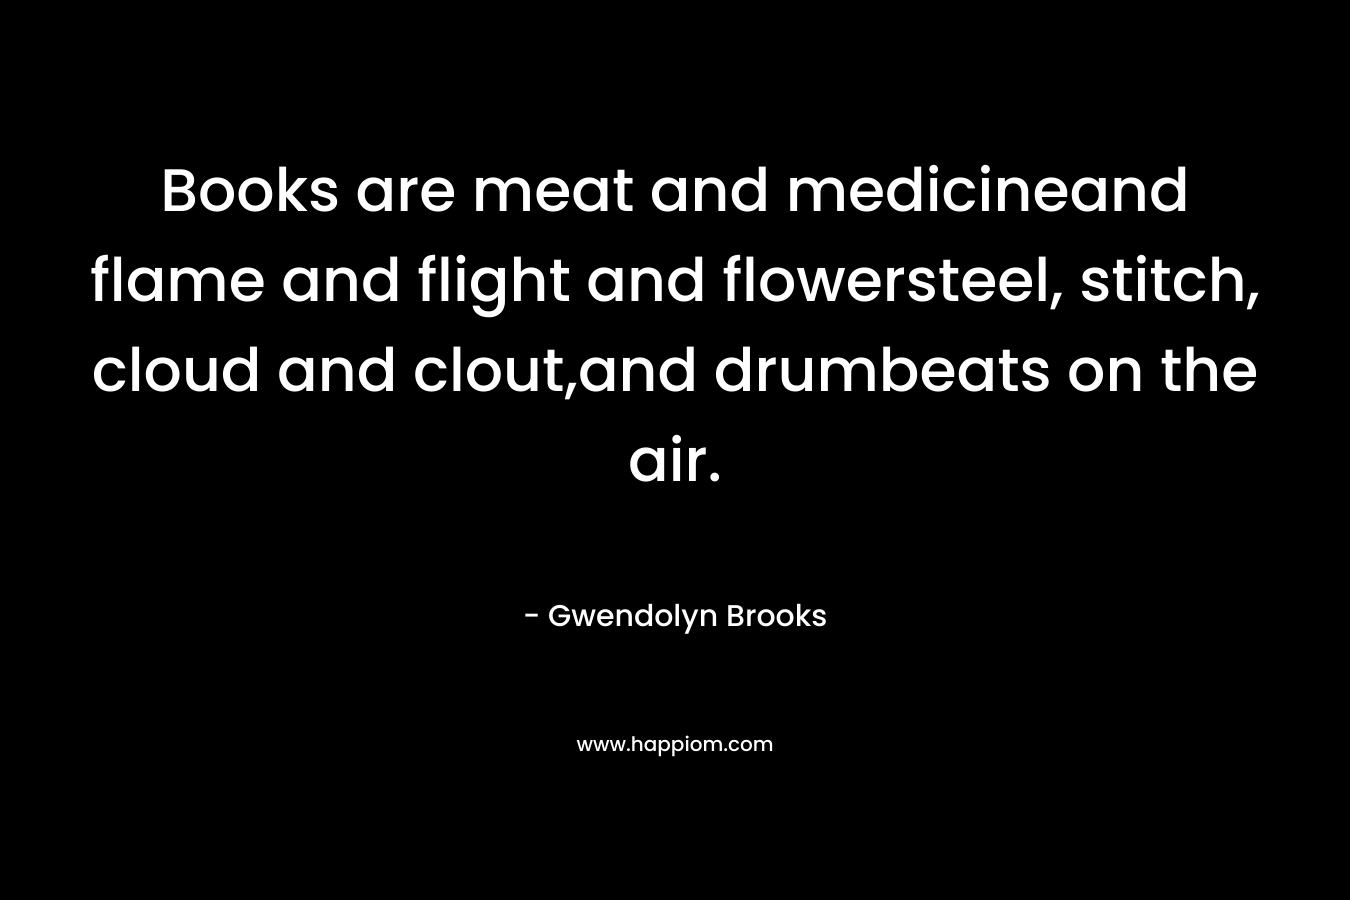 Books are meat and medicineand flame and flight and flowersteel, stitch, cloud and clout,and drumbeats on the air. – Gwendolyn Brooks